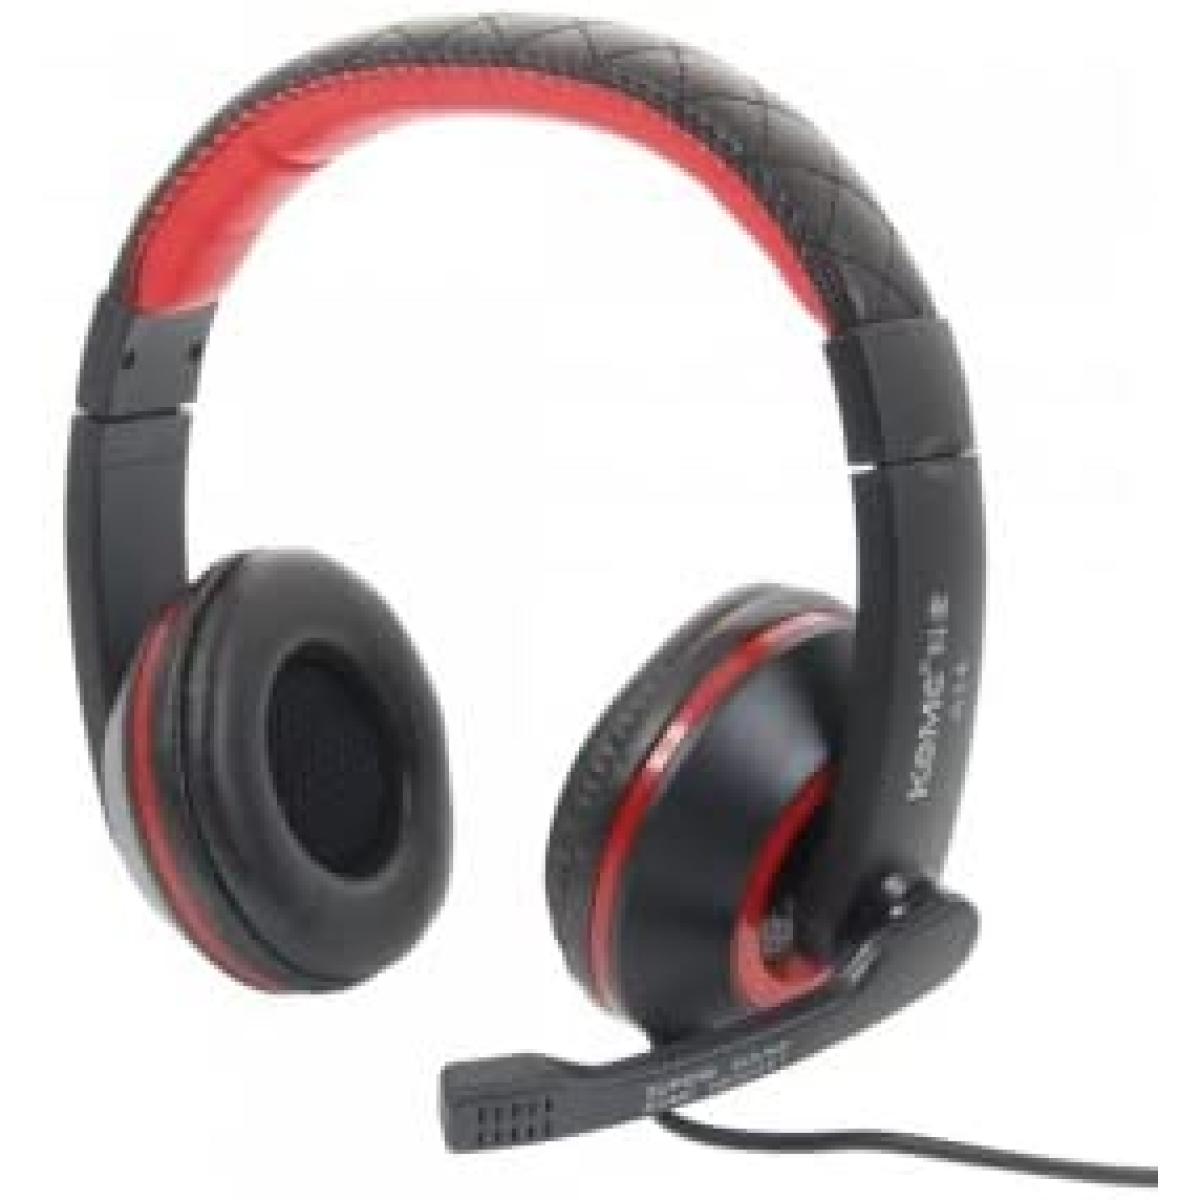 KOMC A14 High Performance Gaming Headset Wired Gaming 3.5mm Stereo with Microphone